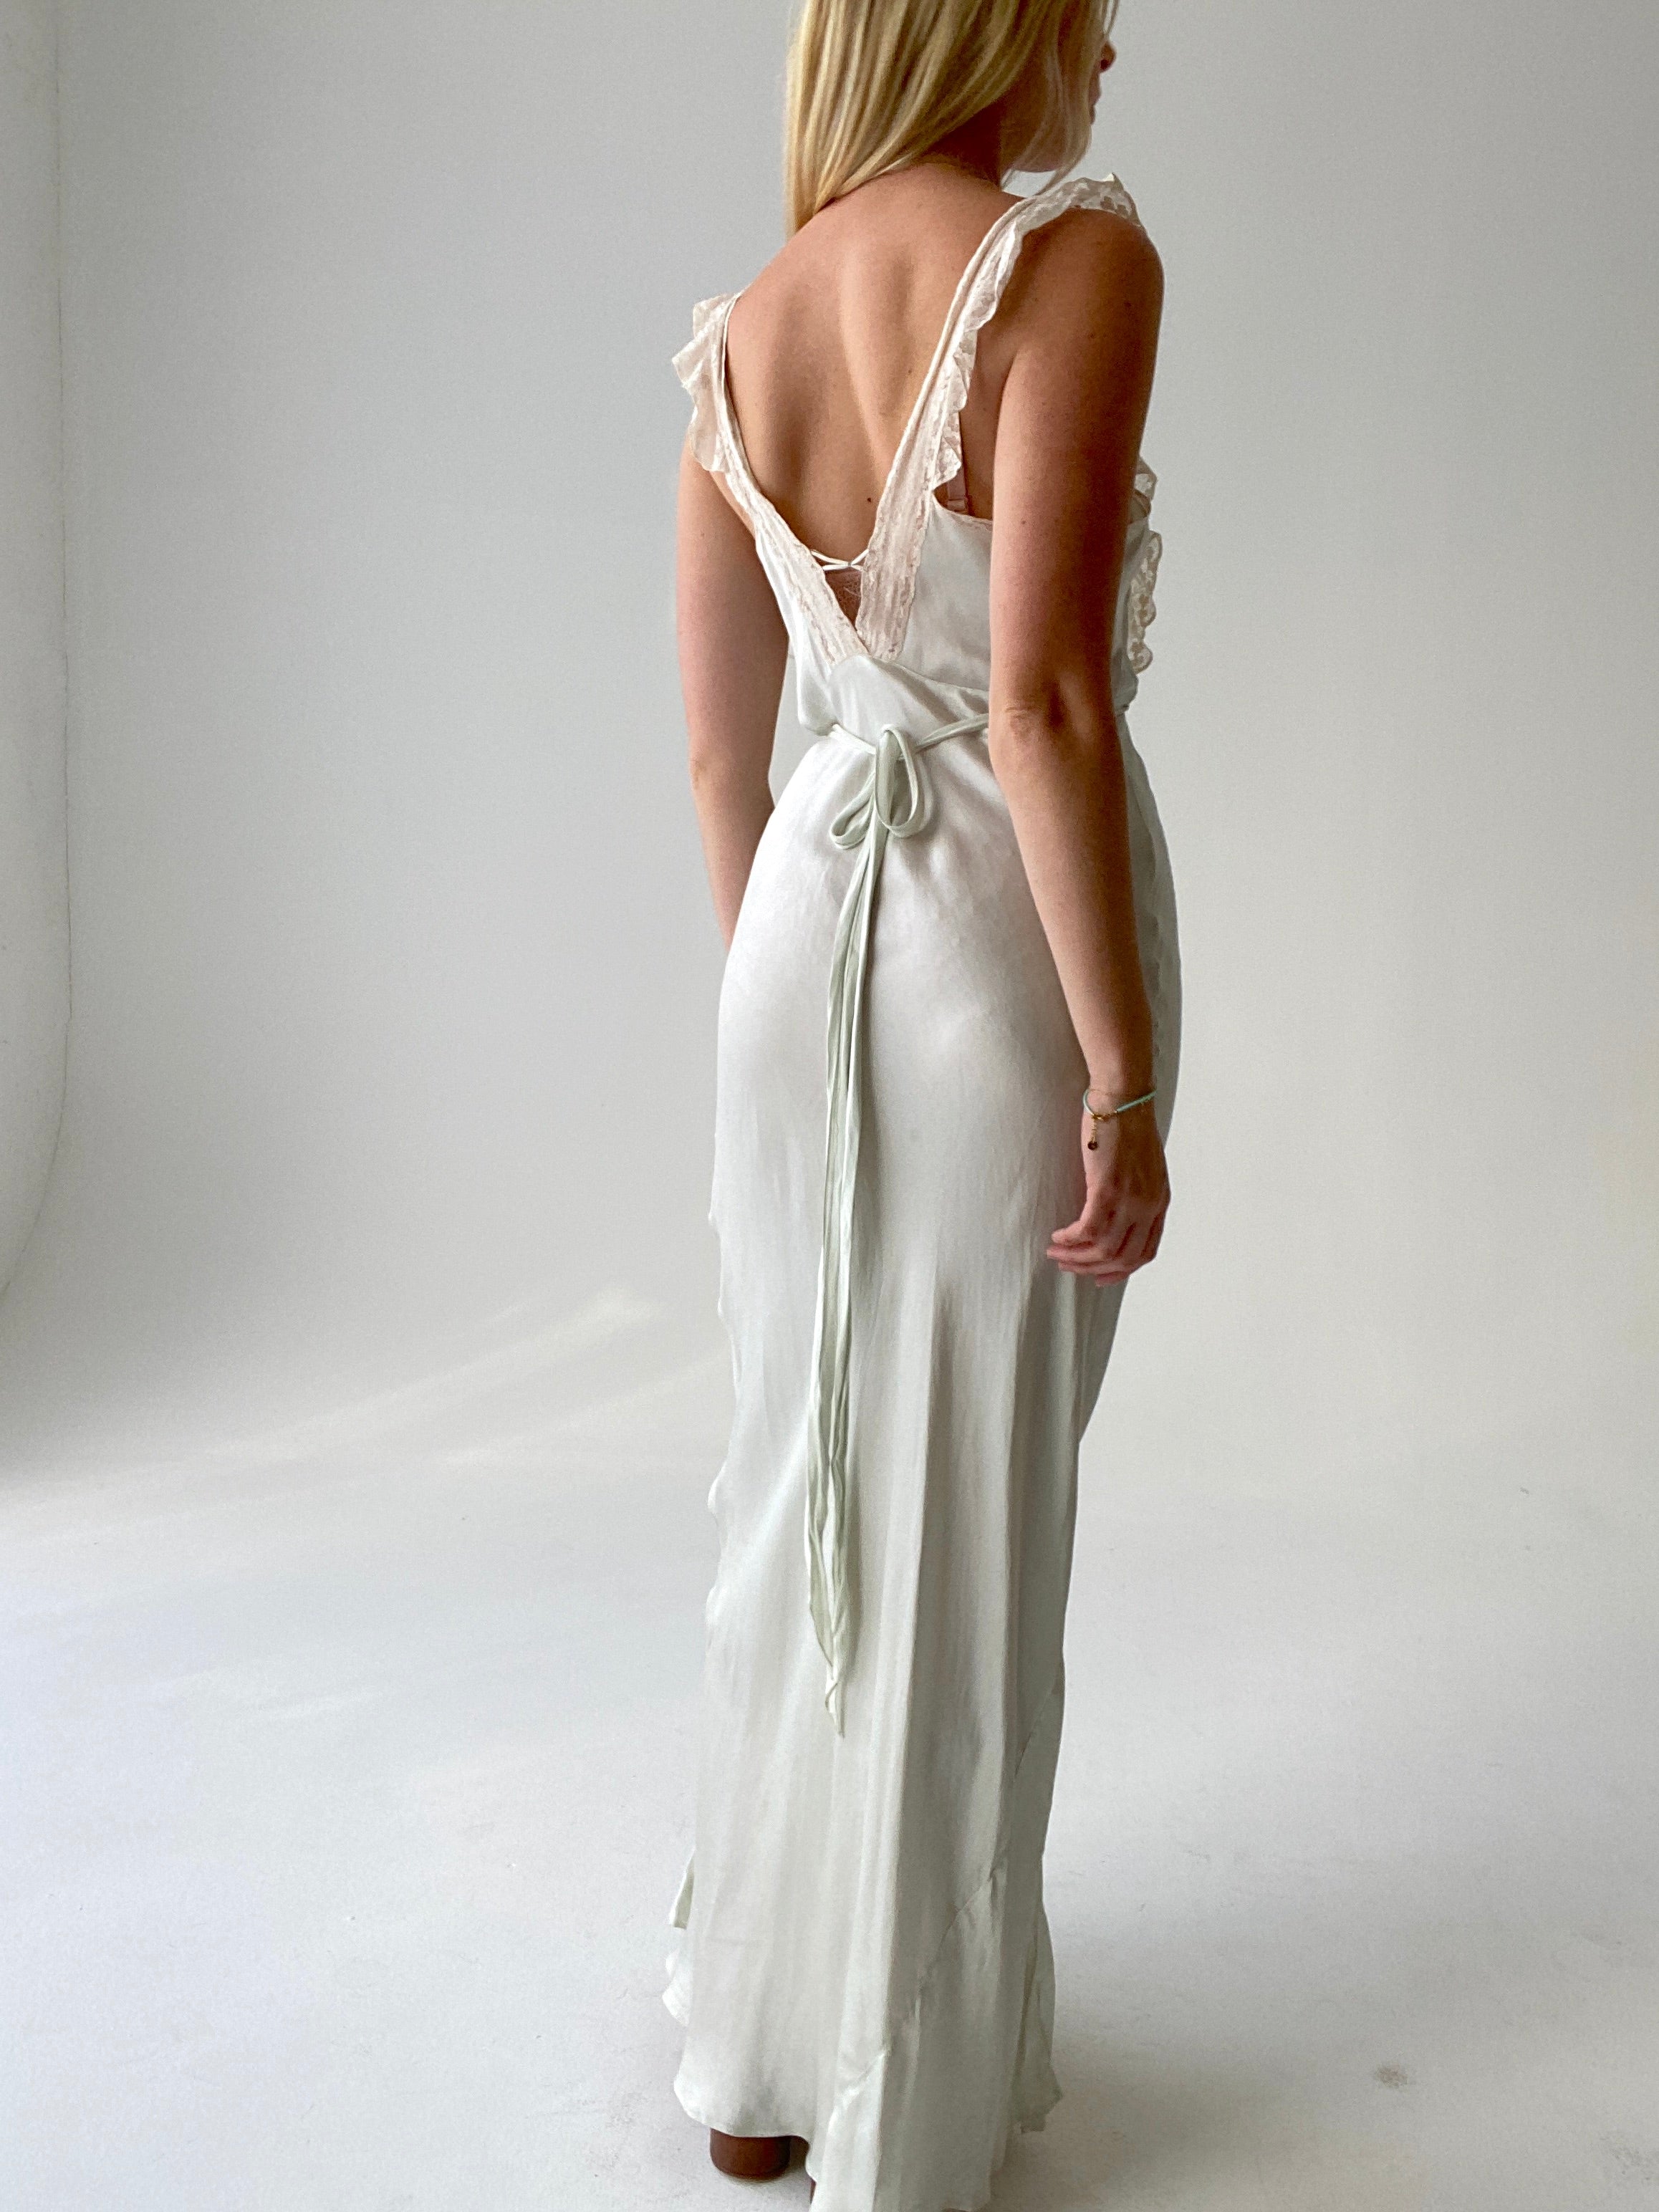 1930's Pale Mint Slip with Off White Lace